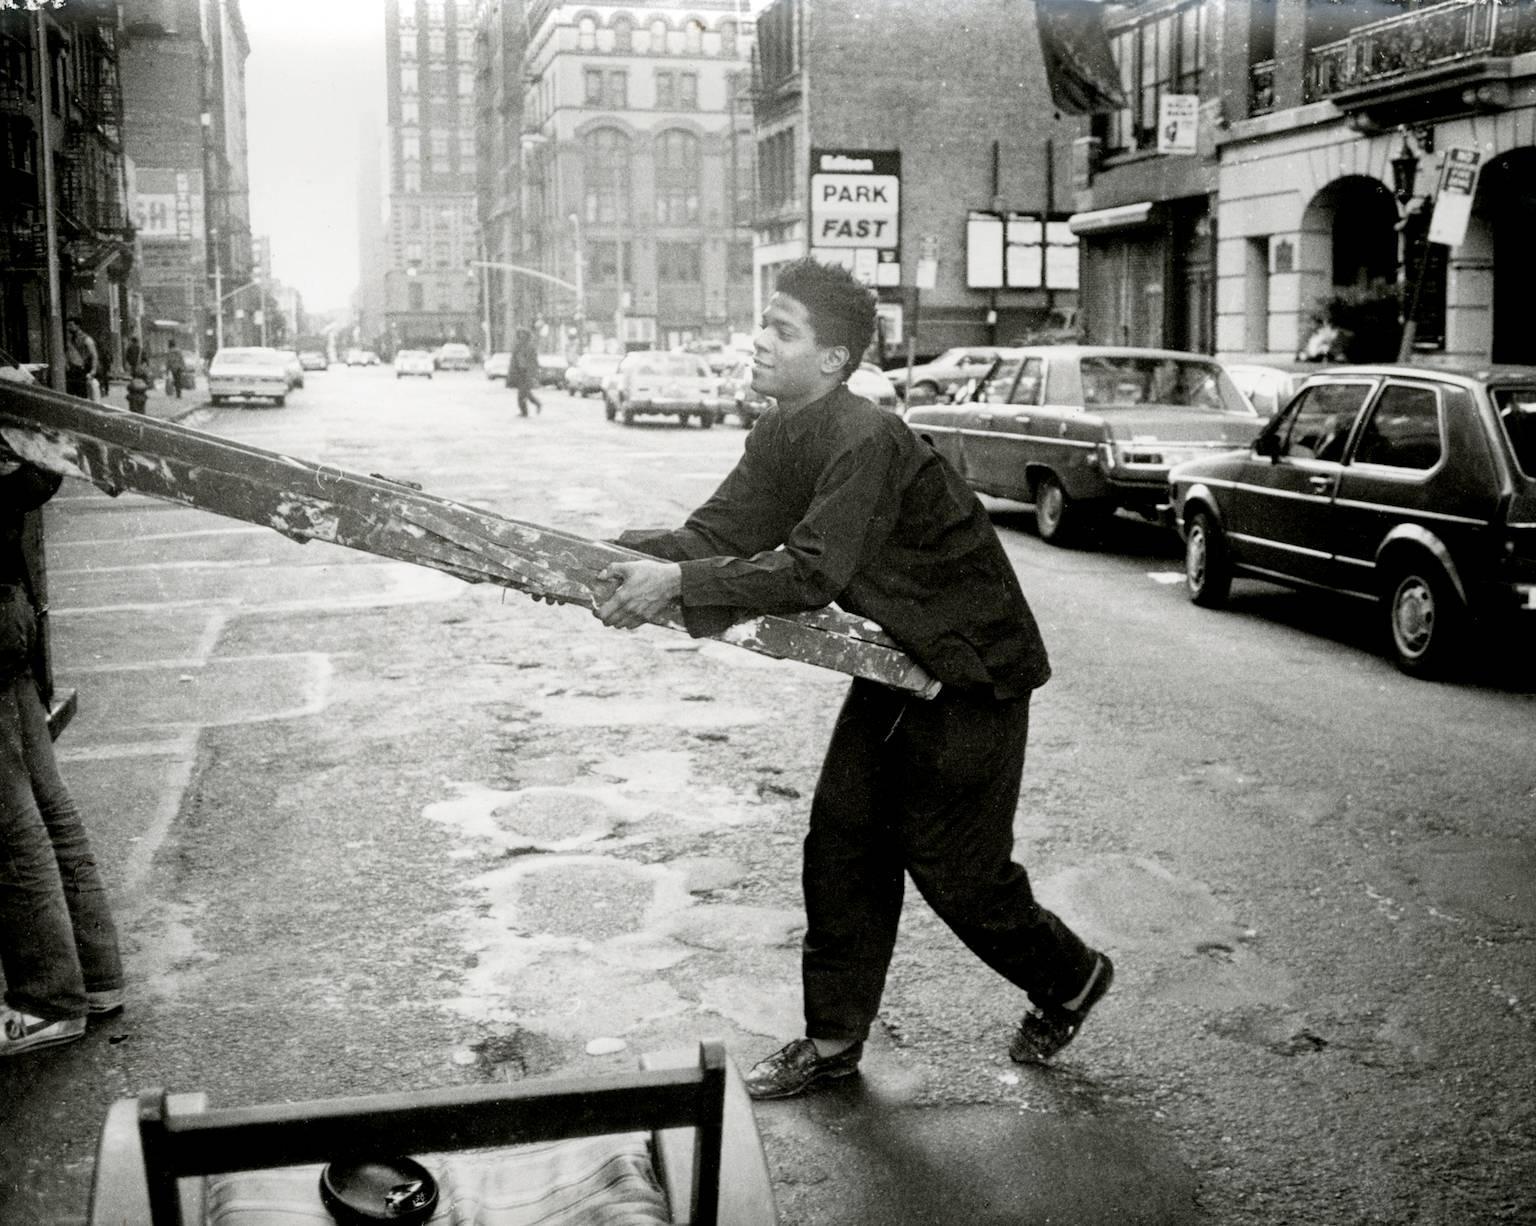 Andy Warhol Portrait Photograph - Jean-Michel Basquiat Carrying a ladder in Soho